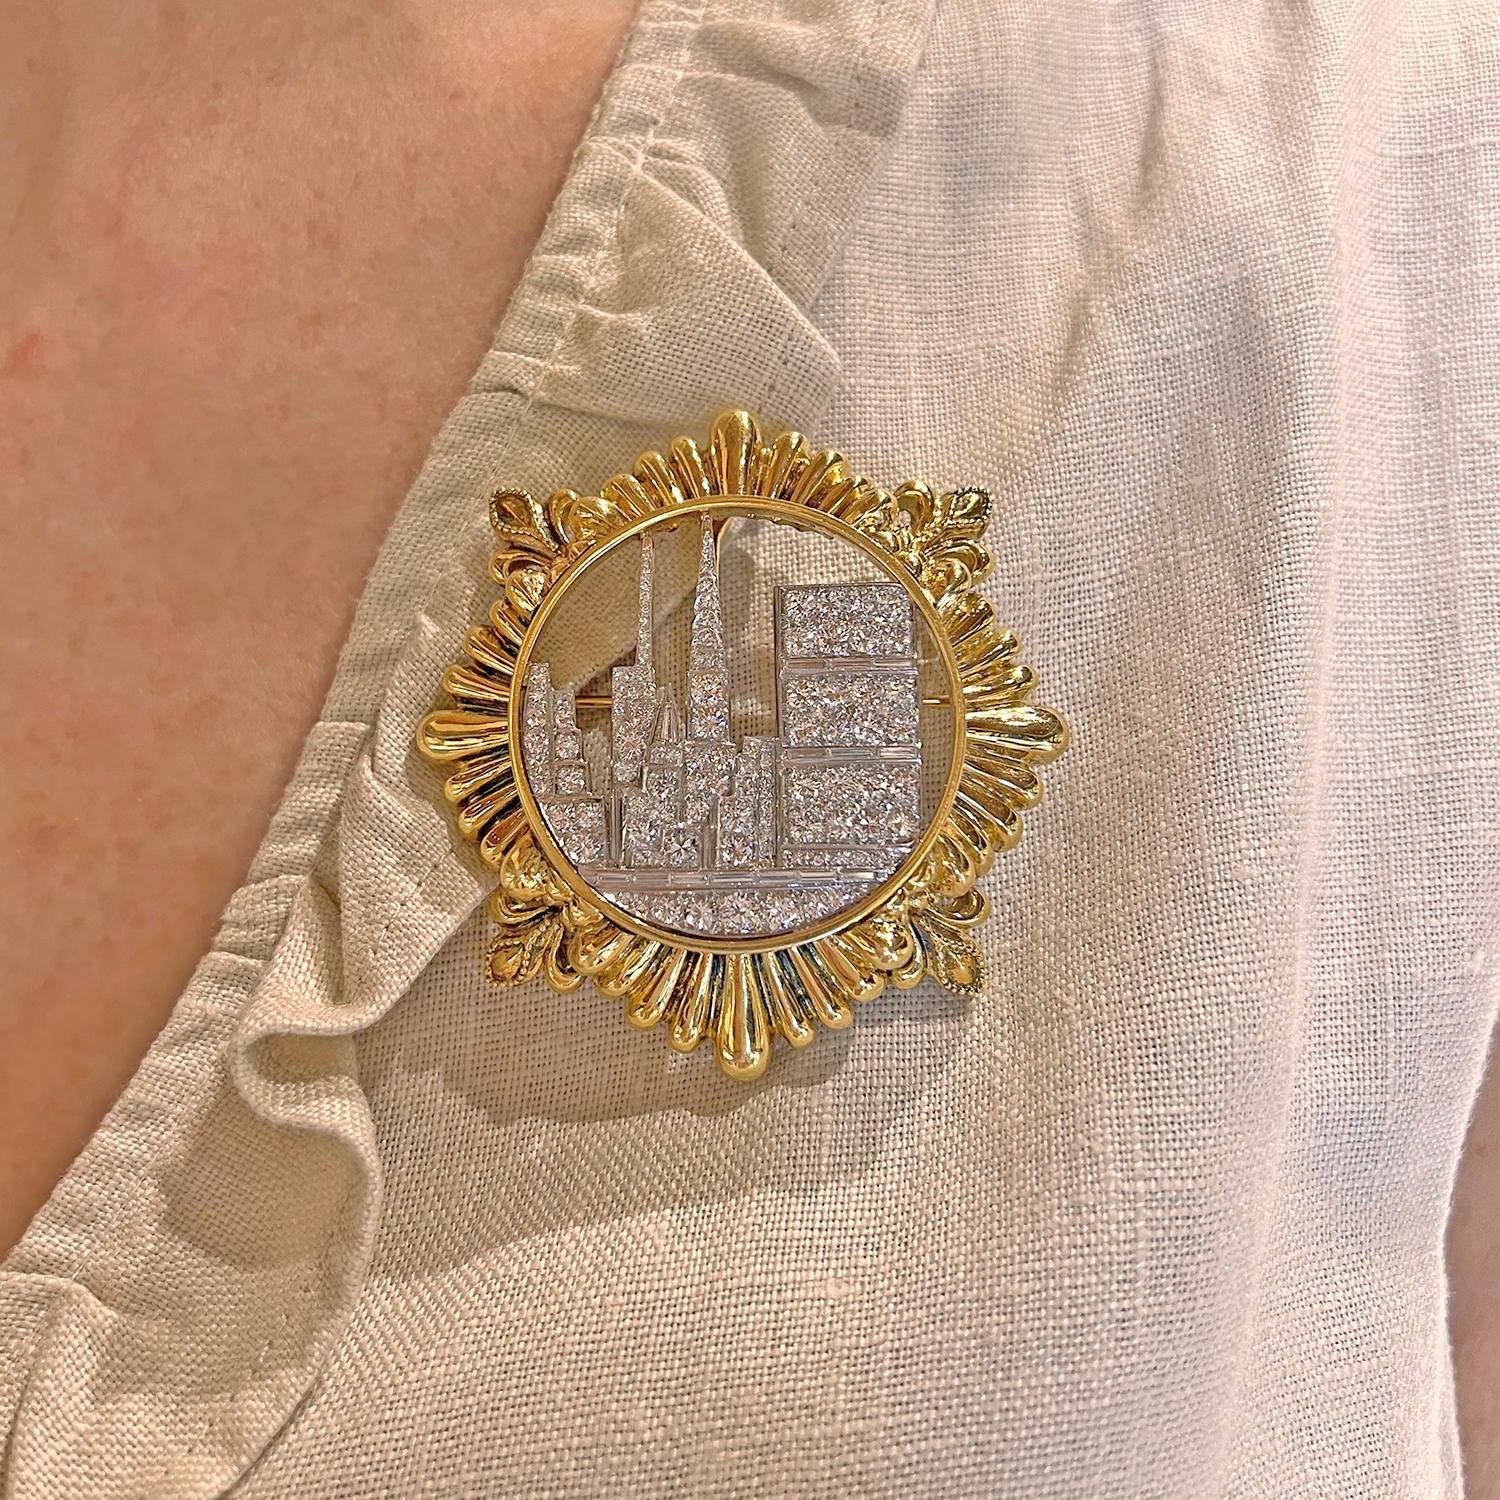 Pendant brooch, centering round-cut and baguette-cut diamonds set to resemble a city skyline in platinum surrounded by an 18k yellow gold fluted frame with four fleur-de-lis motifs.  Reverse has a curved hook that allows the wearer to suspend it on